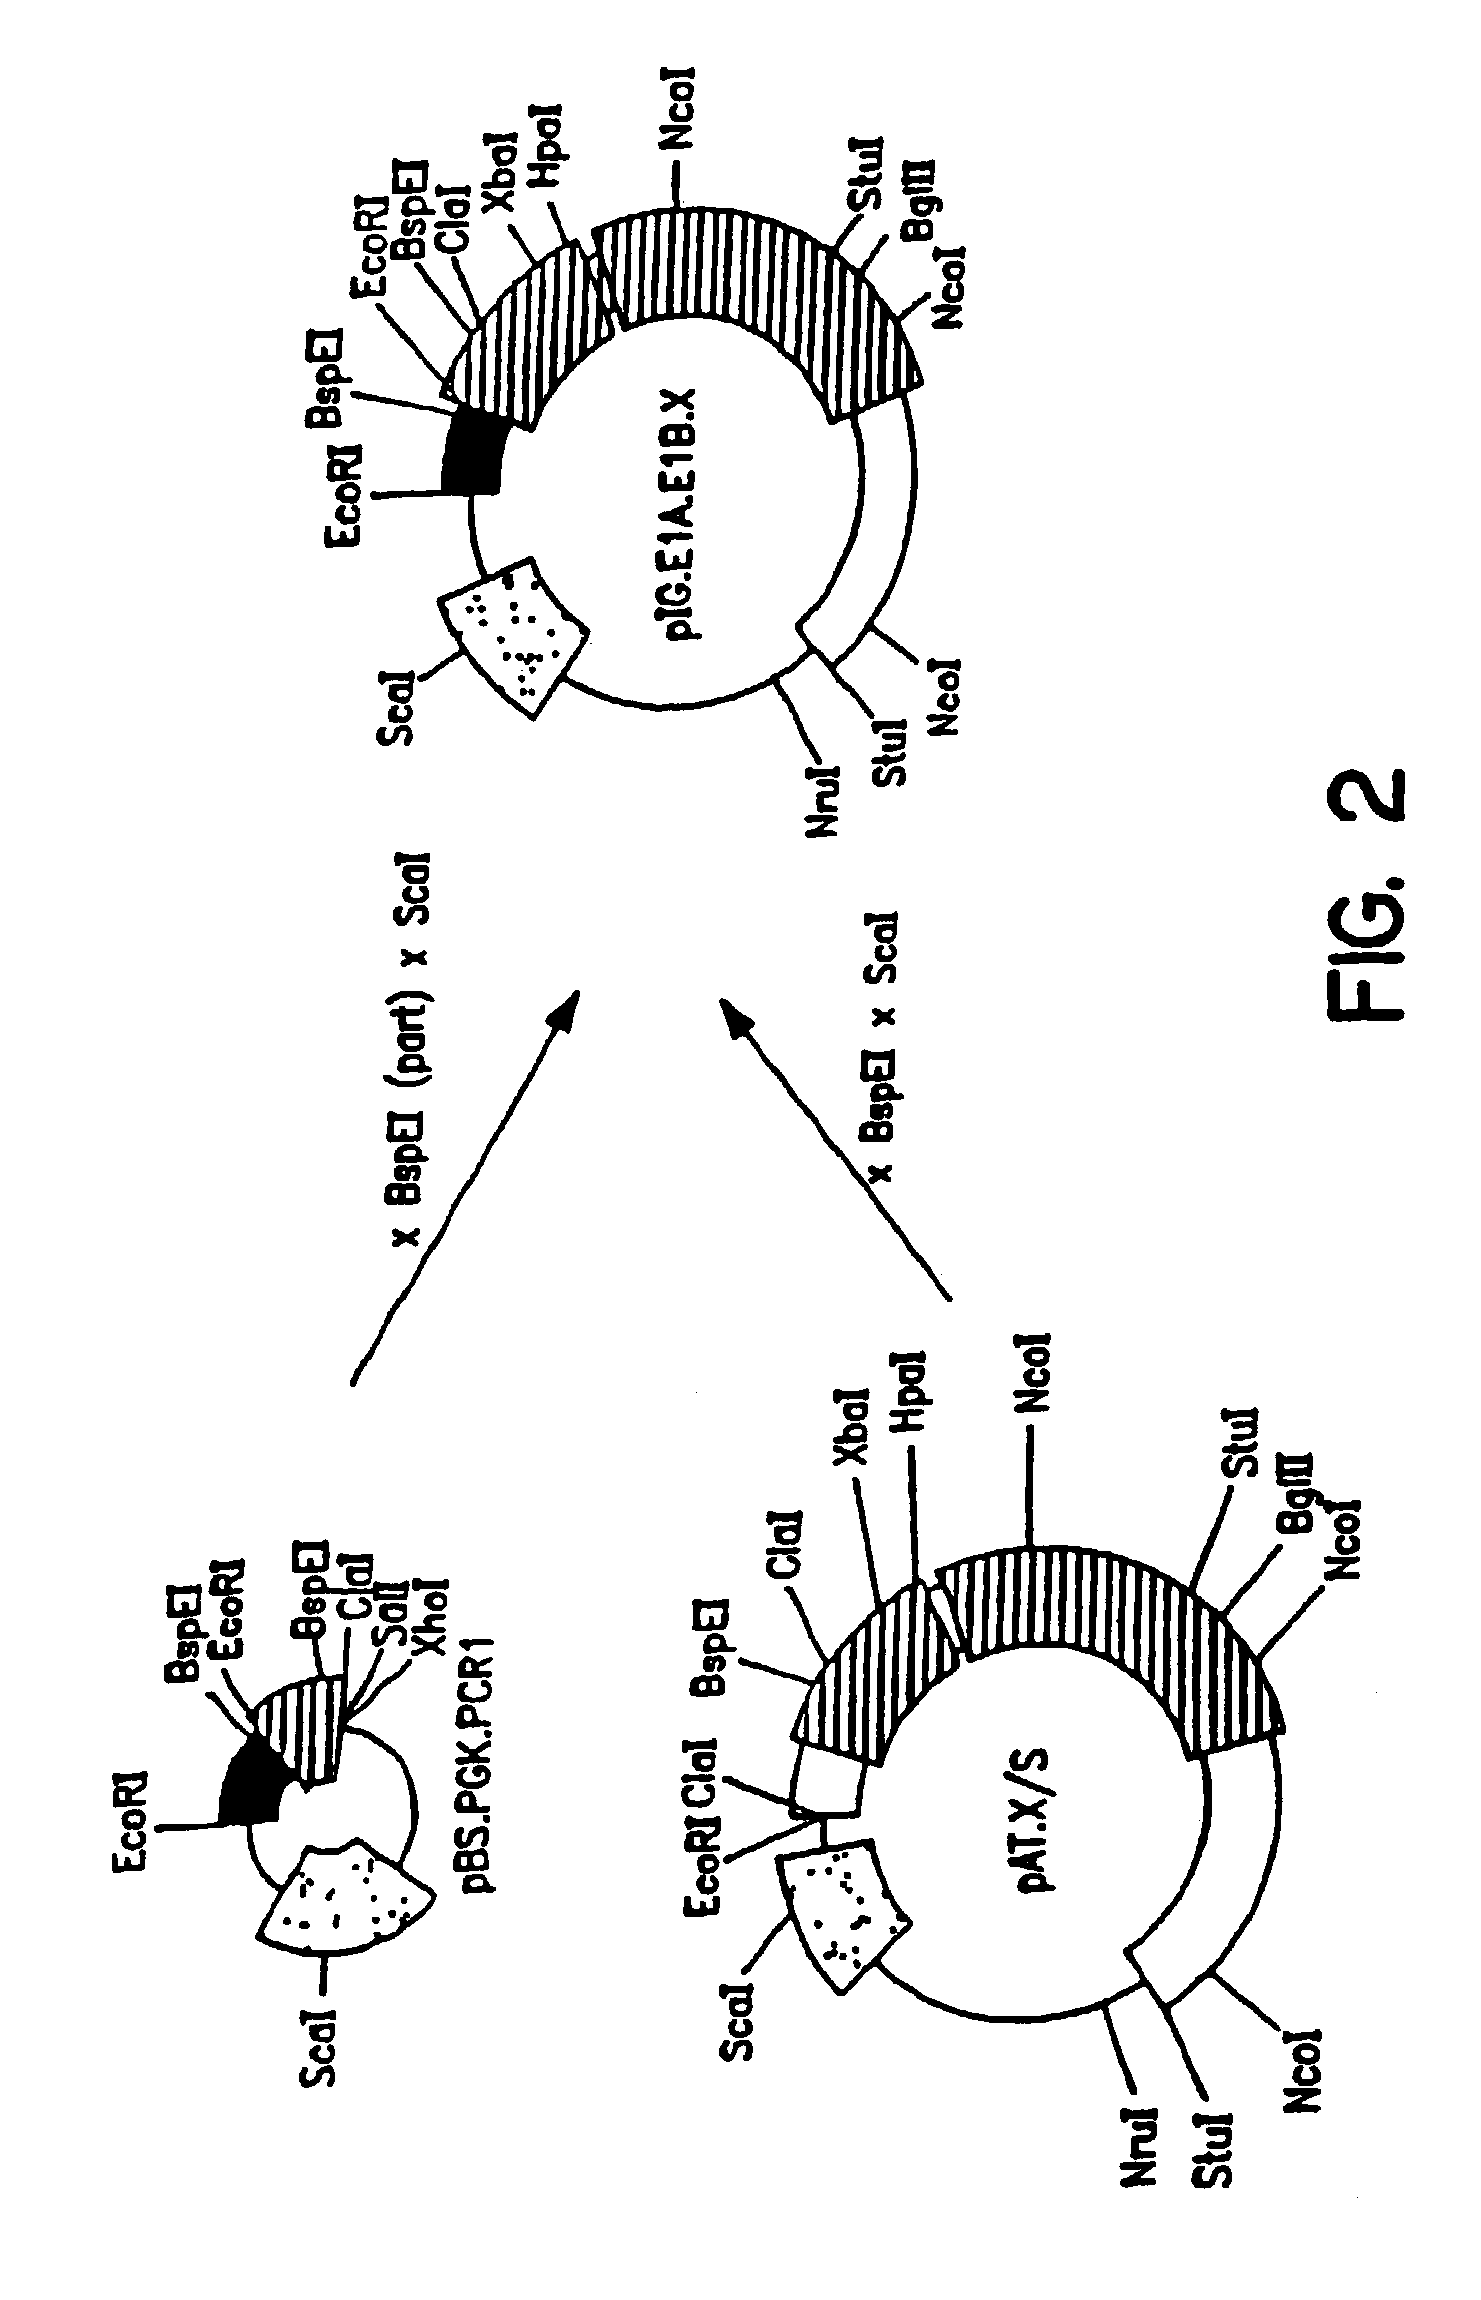 Packaging systems for human recombinant adenovirus to be used in gene therapy